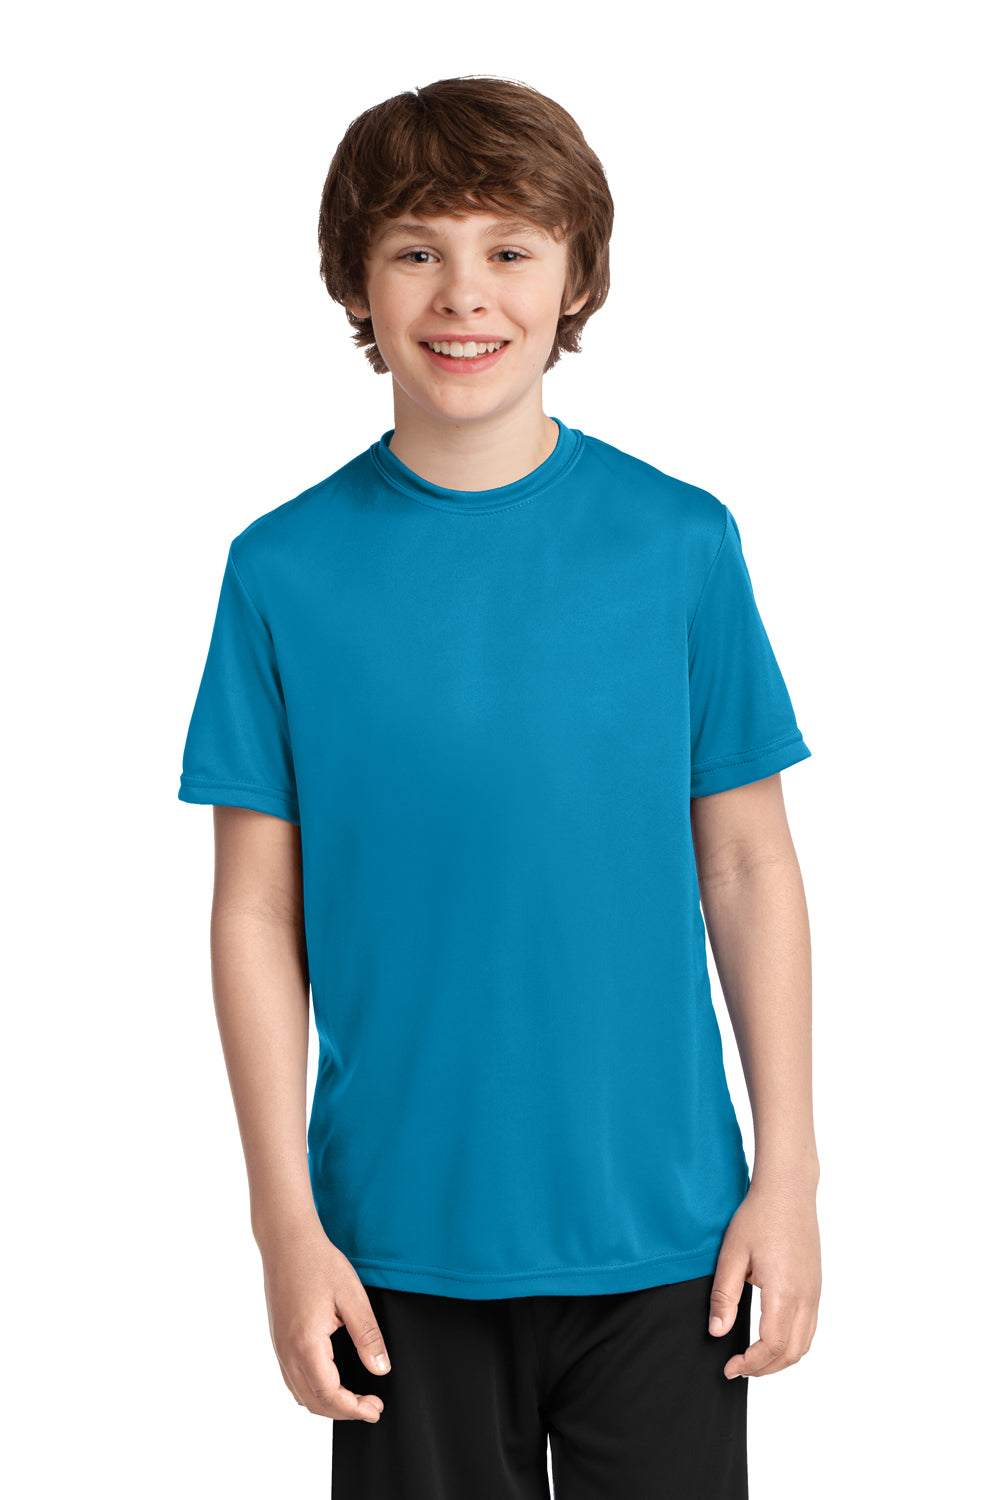 Port & Company PC380Y Youth Dry Zone Performance Moisture Wicking Short Sleeve Crewneck T-Shirt Neon Blue Front